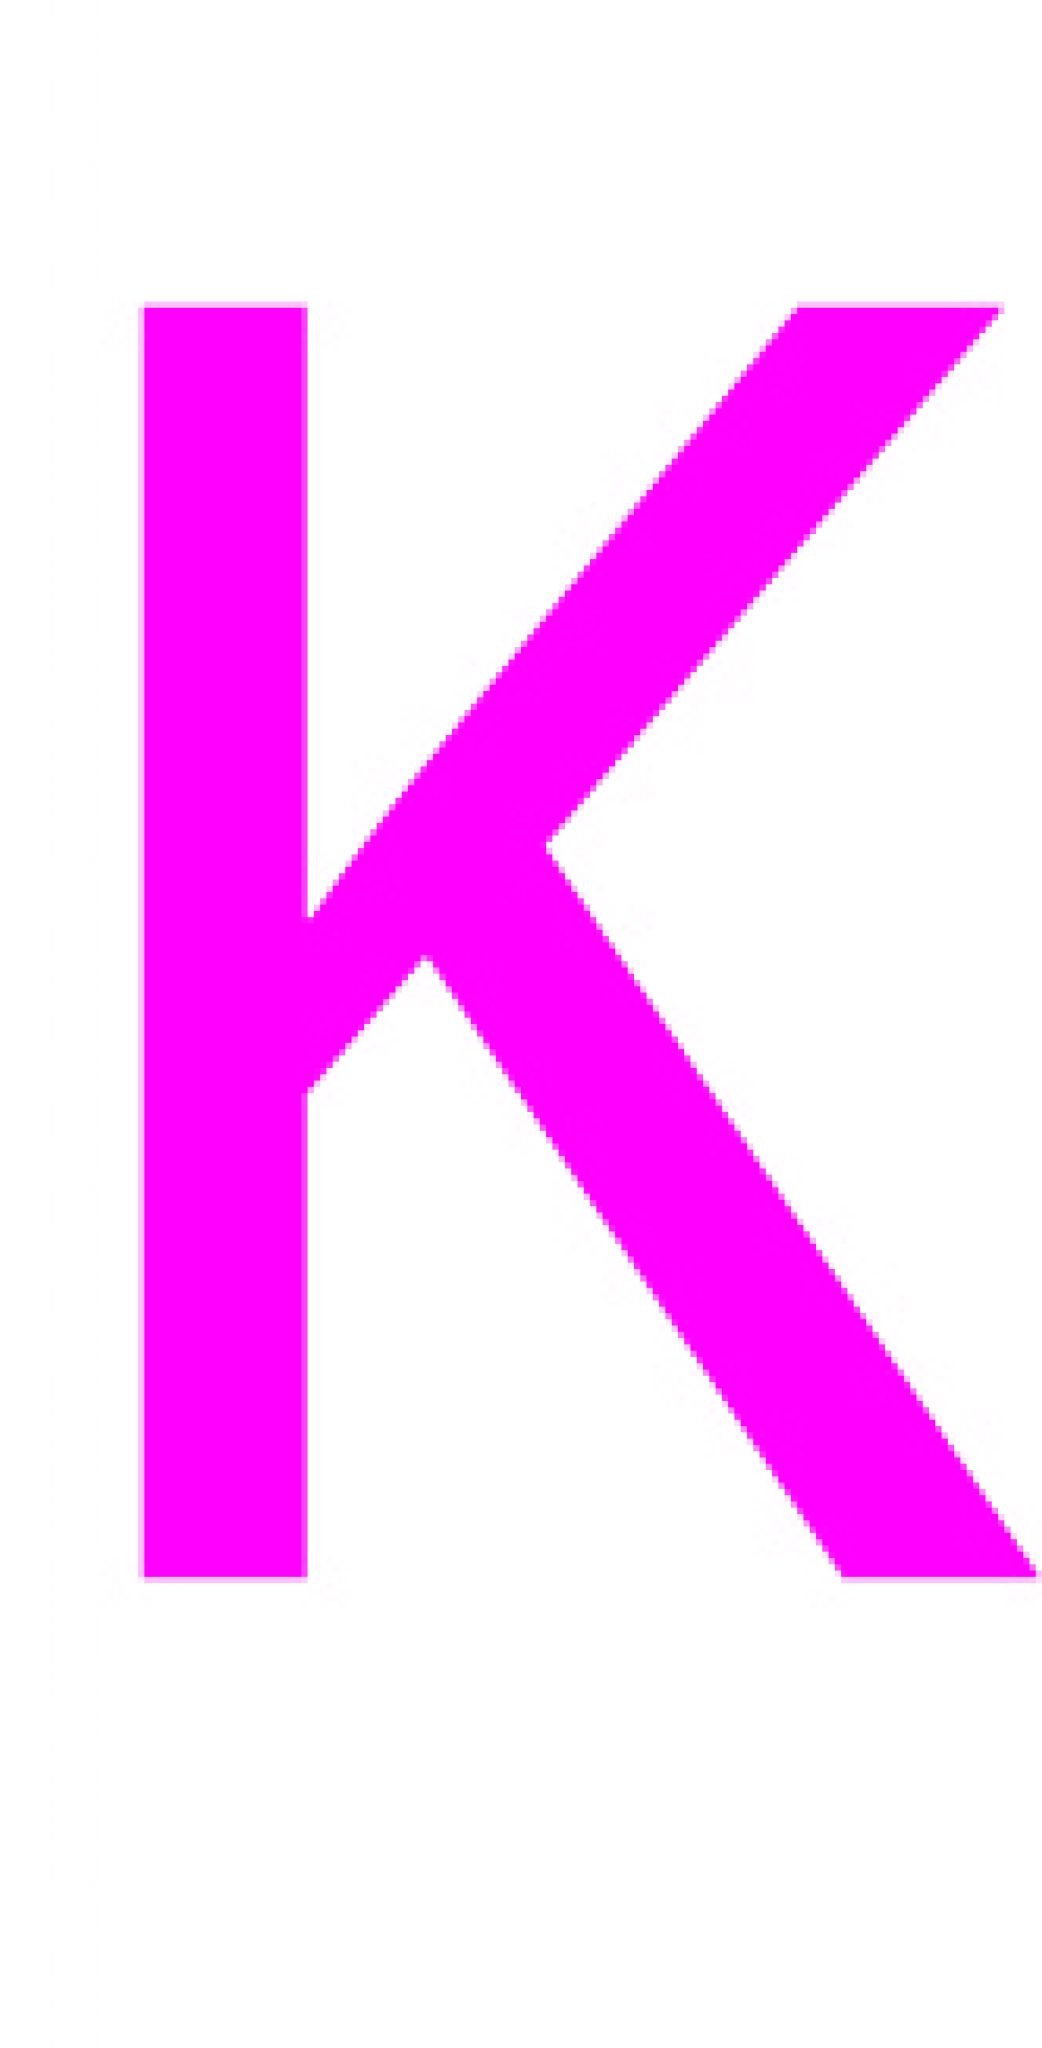 Laser cut letter K from 3mm thick acrylic